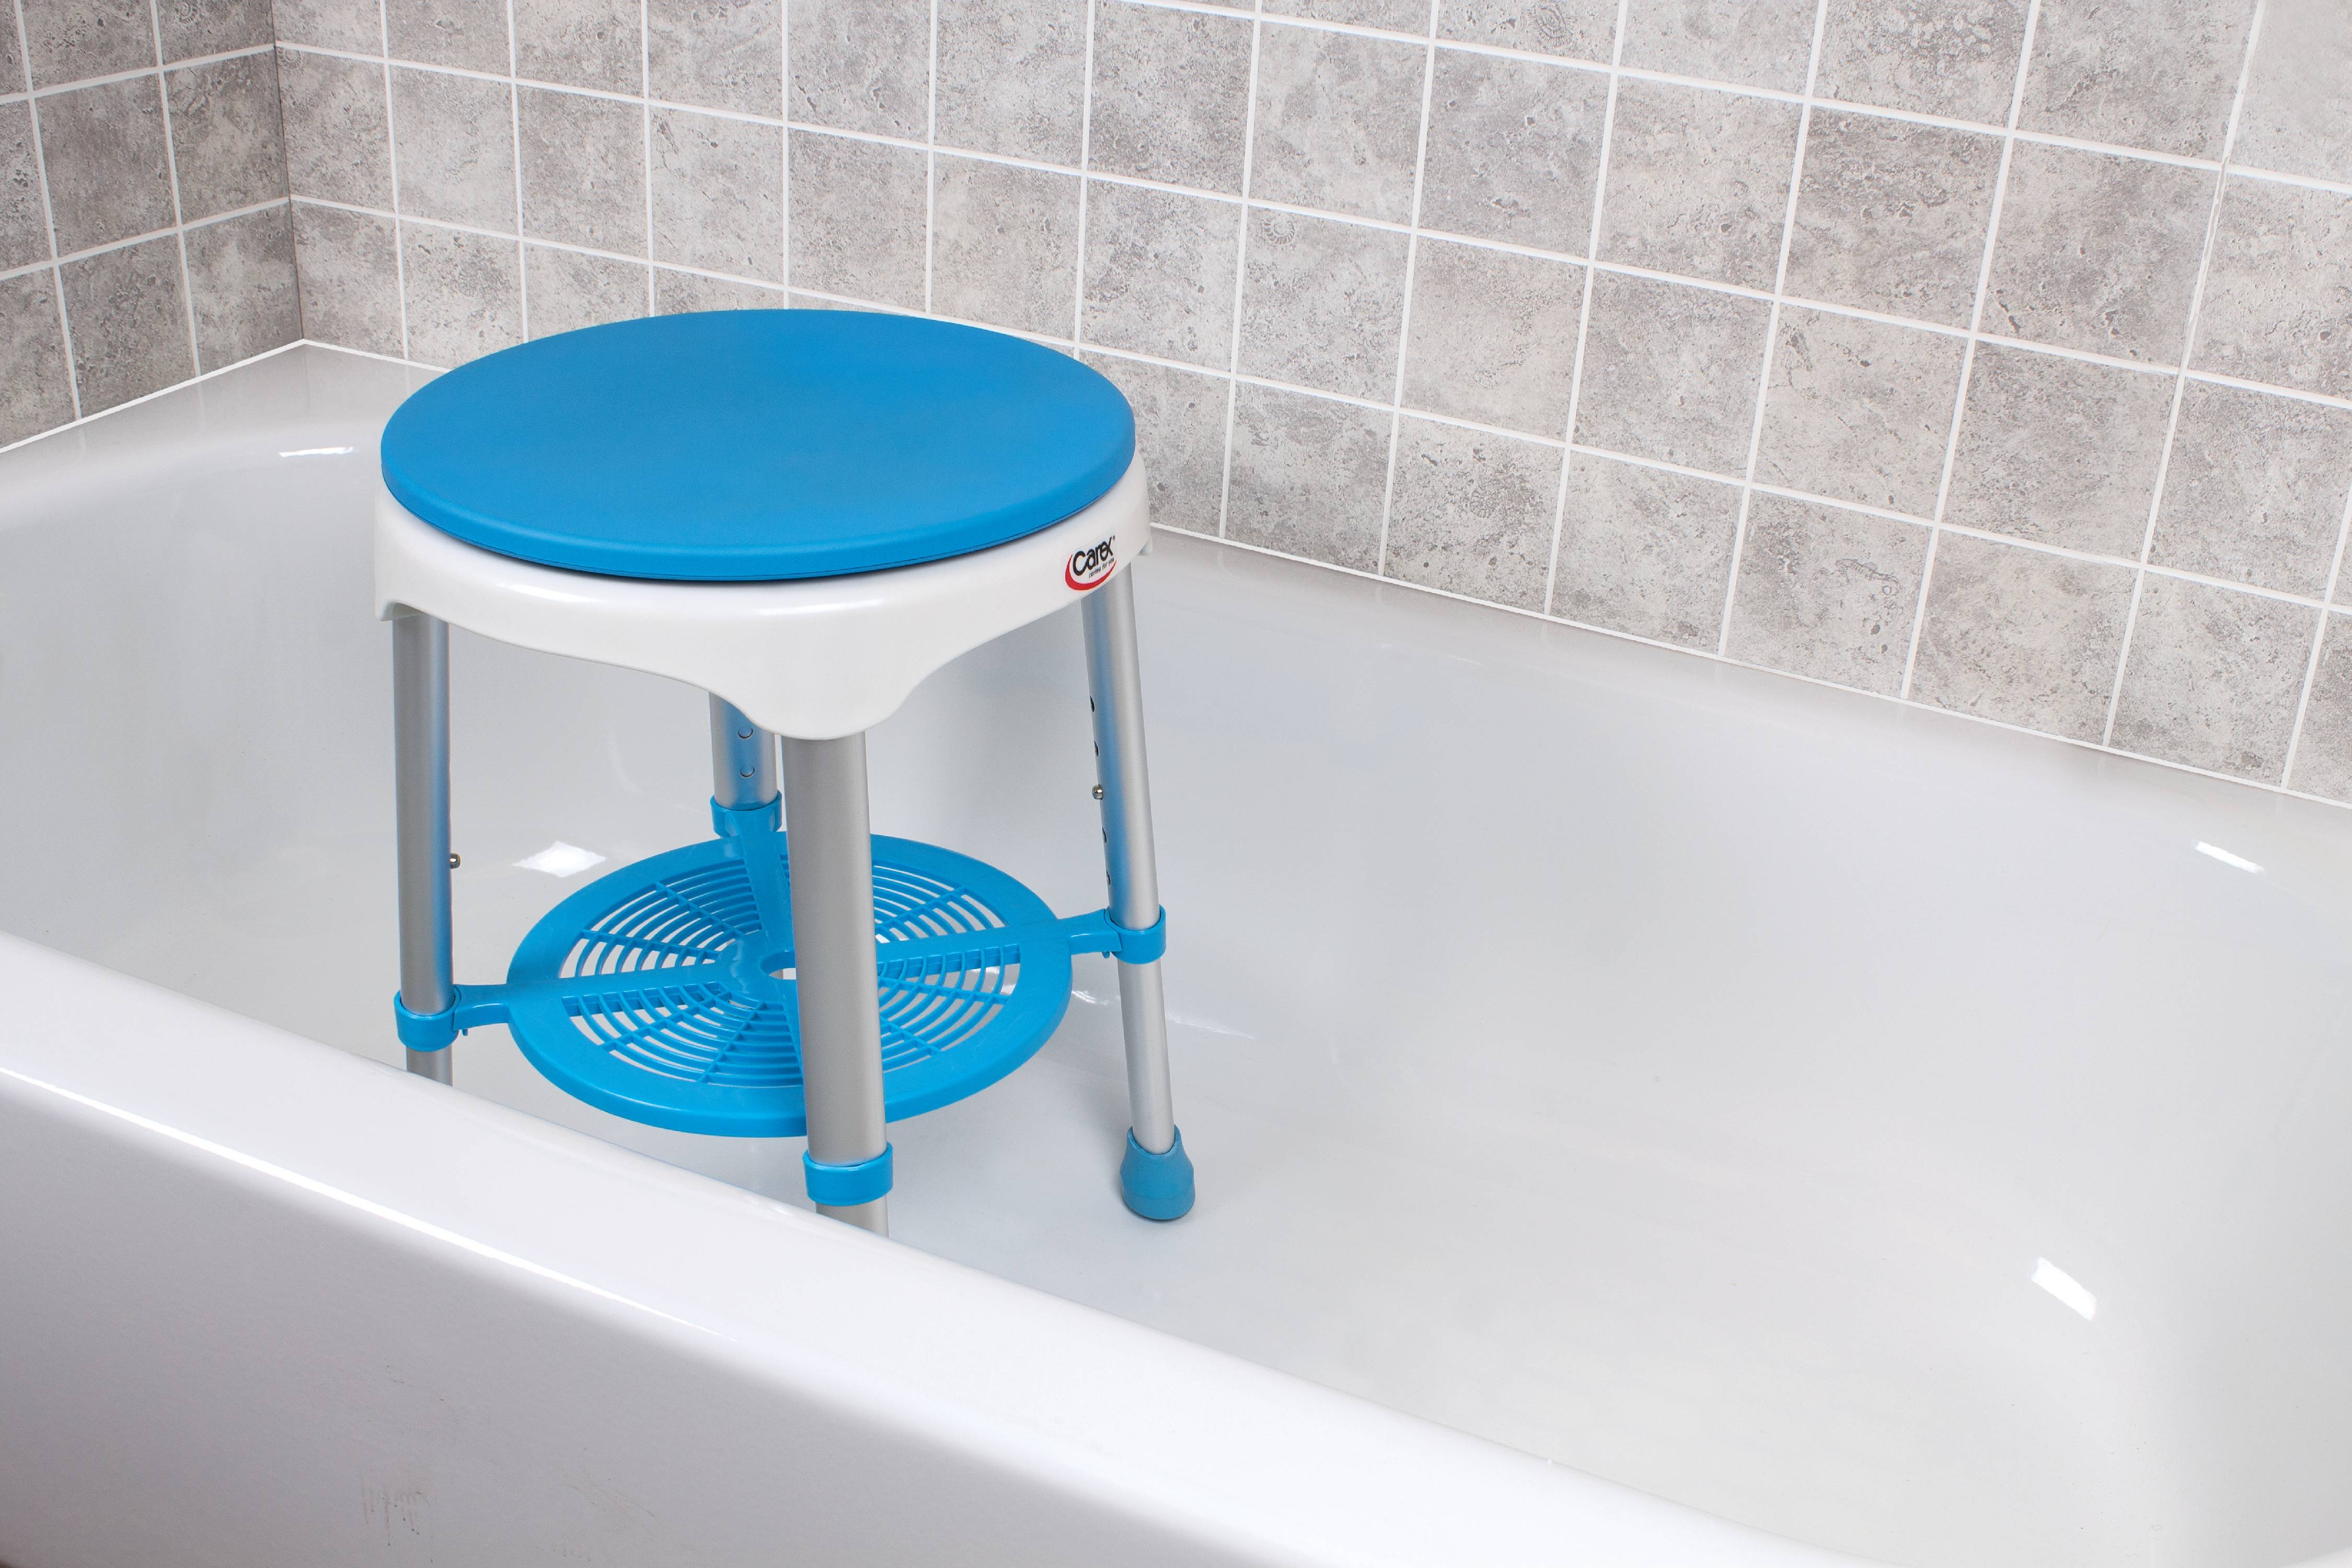 Carex Easy Swivel Shower and Bath Stool, Storage Tray, Rotates 360 Degrees, 300 lb Weight Capacity - image 3 of 9